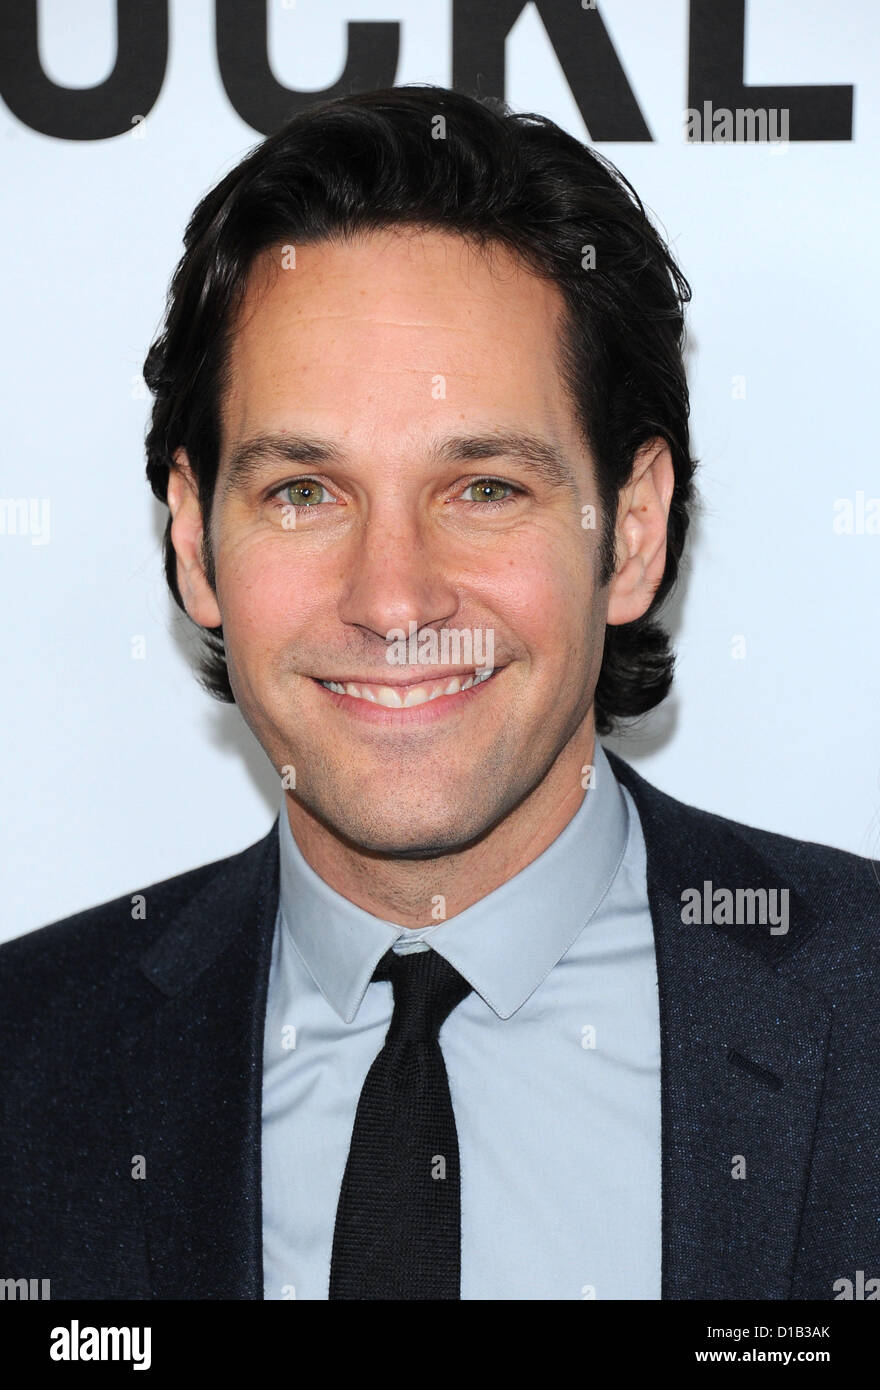 Hollywood, California, USA. 12th December 2012. Paul Rudd arriving at the Los Angeles film premiere of 'This is 40' Chinese Theatre, Hollywood, CA, USA Dec 12th 2012 Stock Photo